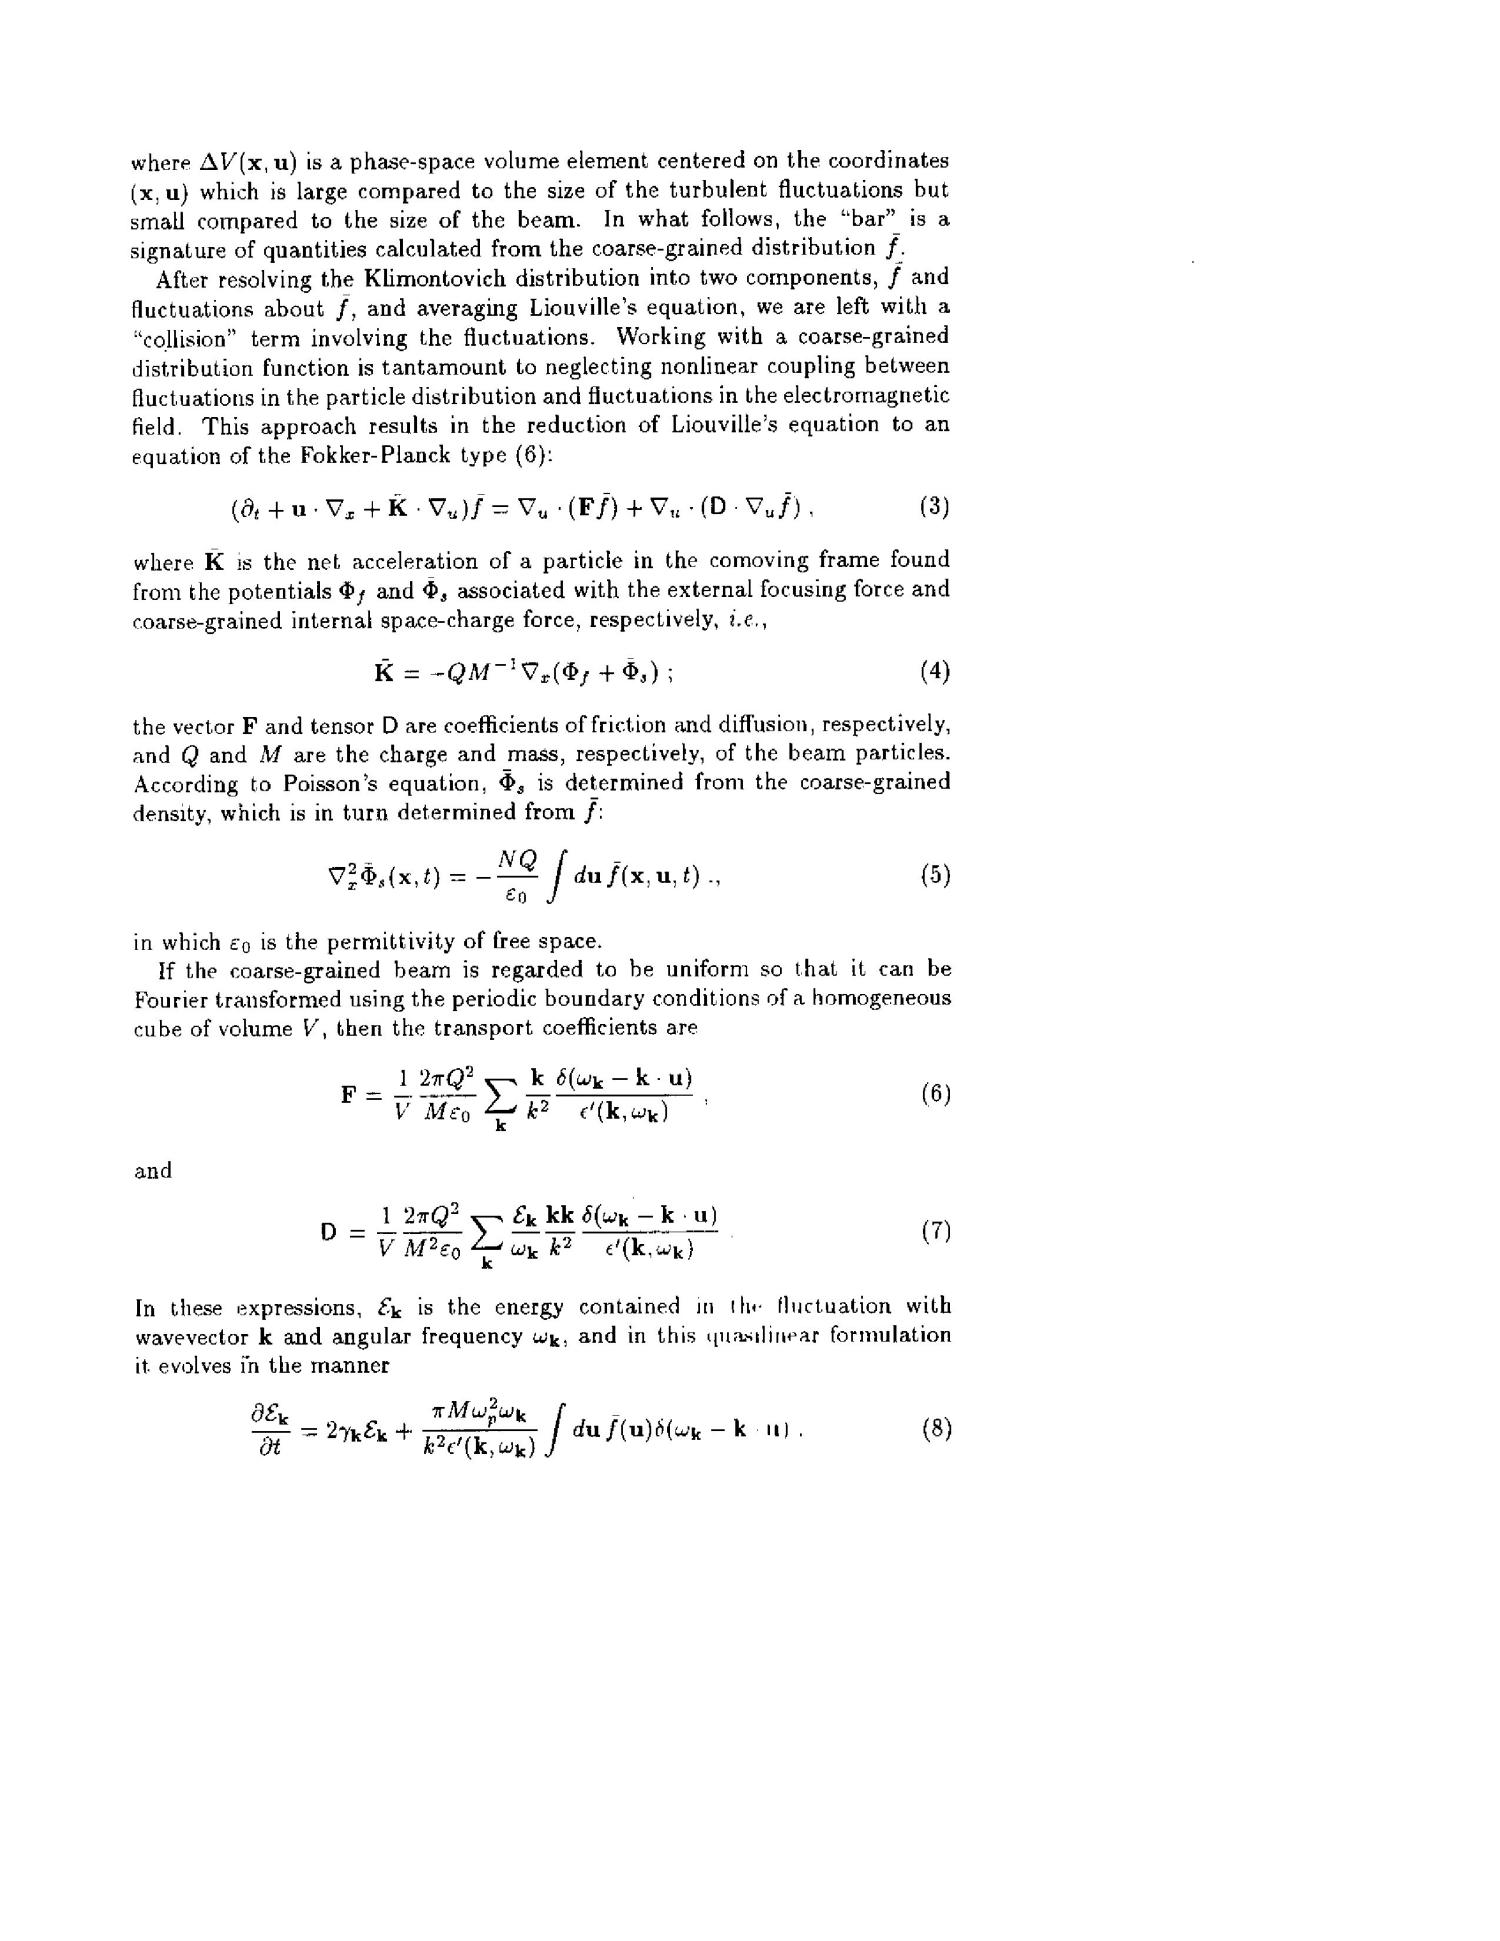 Conceptual foundation of the Fokker-Planck approach to space-charge effects
                                                
                                                    [Sequence #]: 3 of 6
                                                